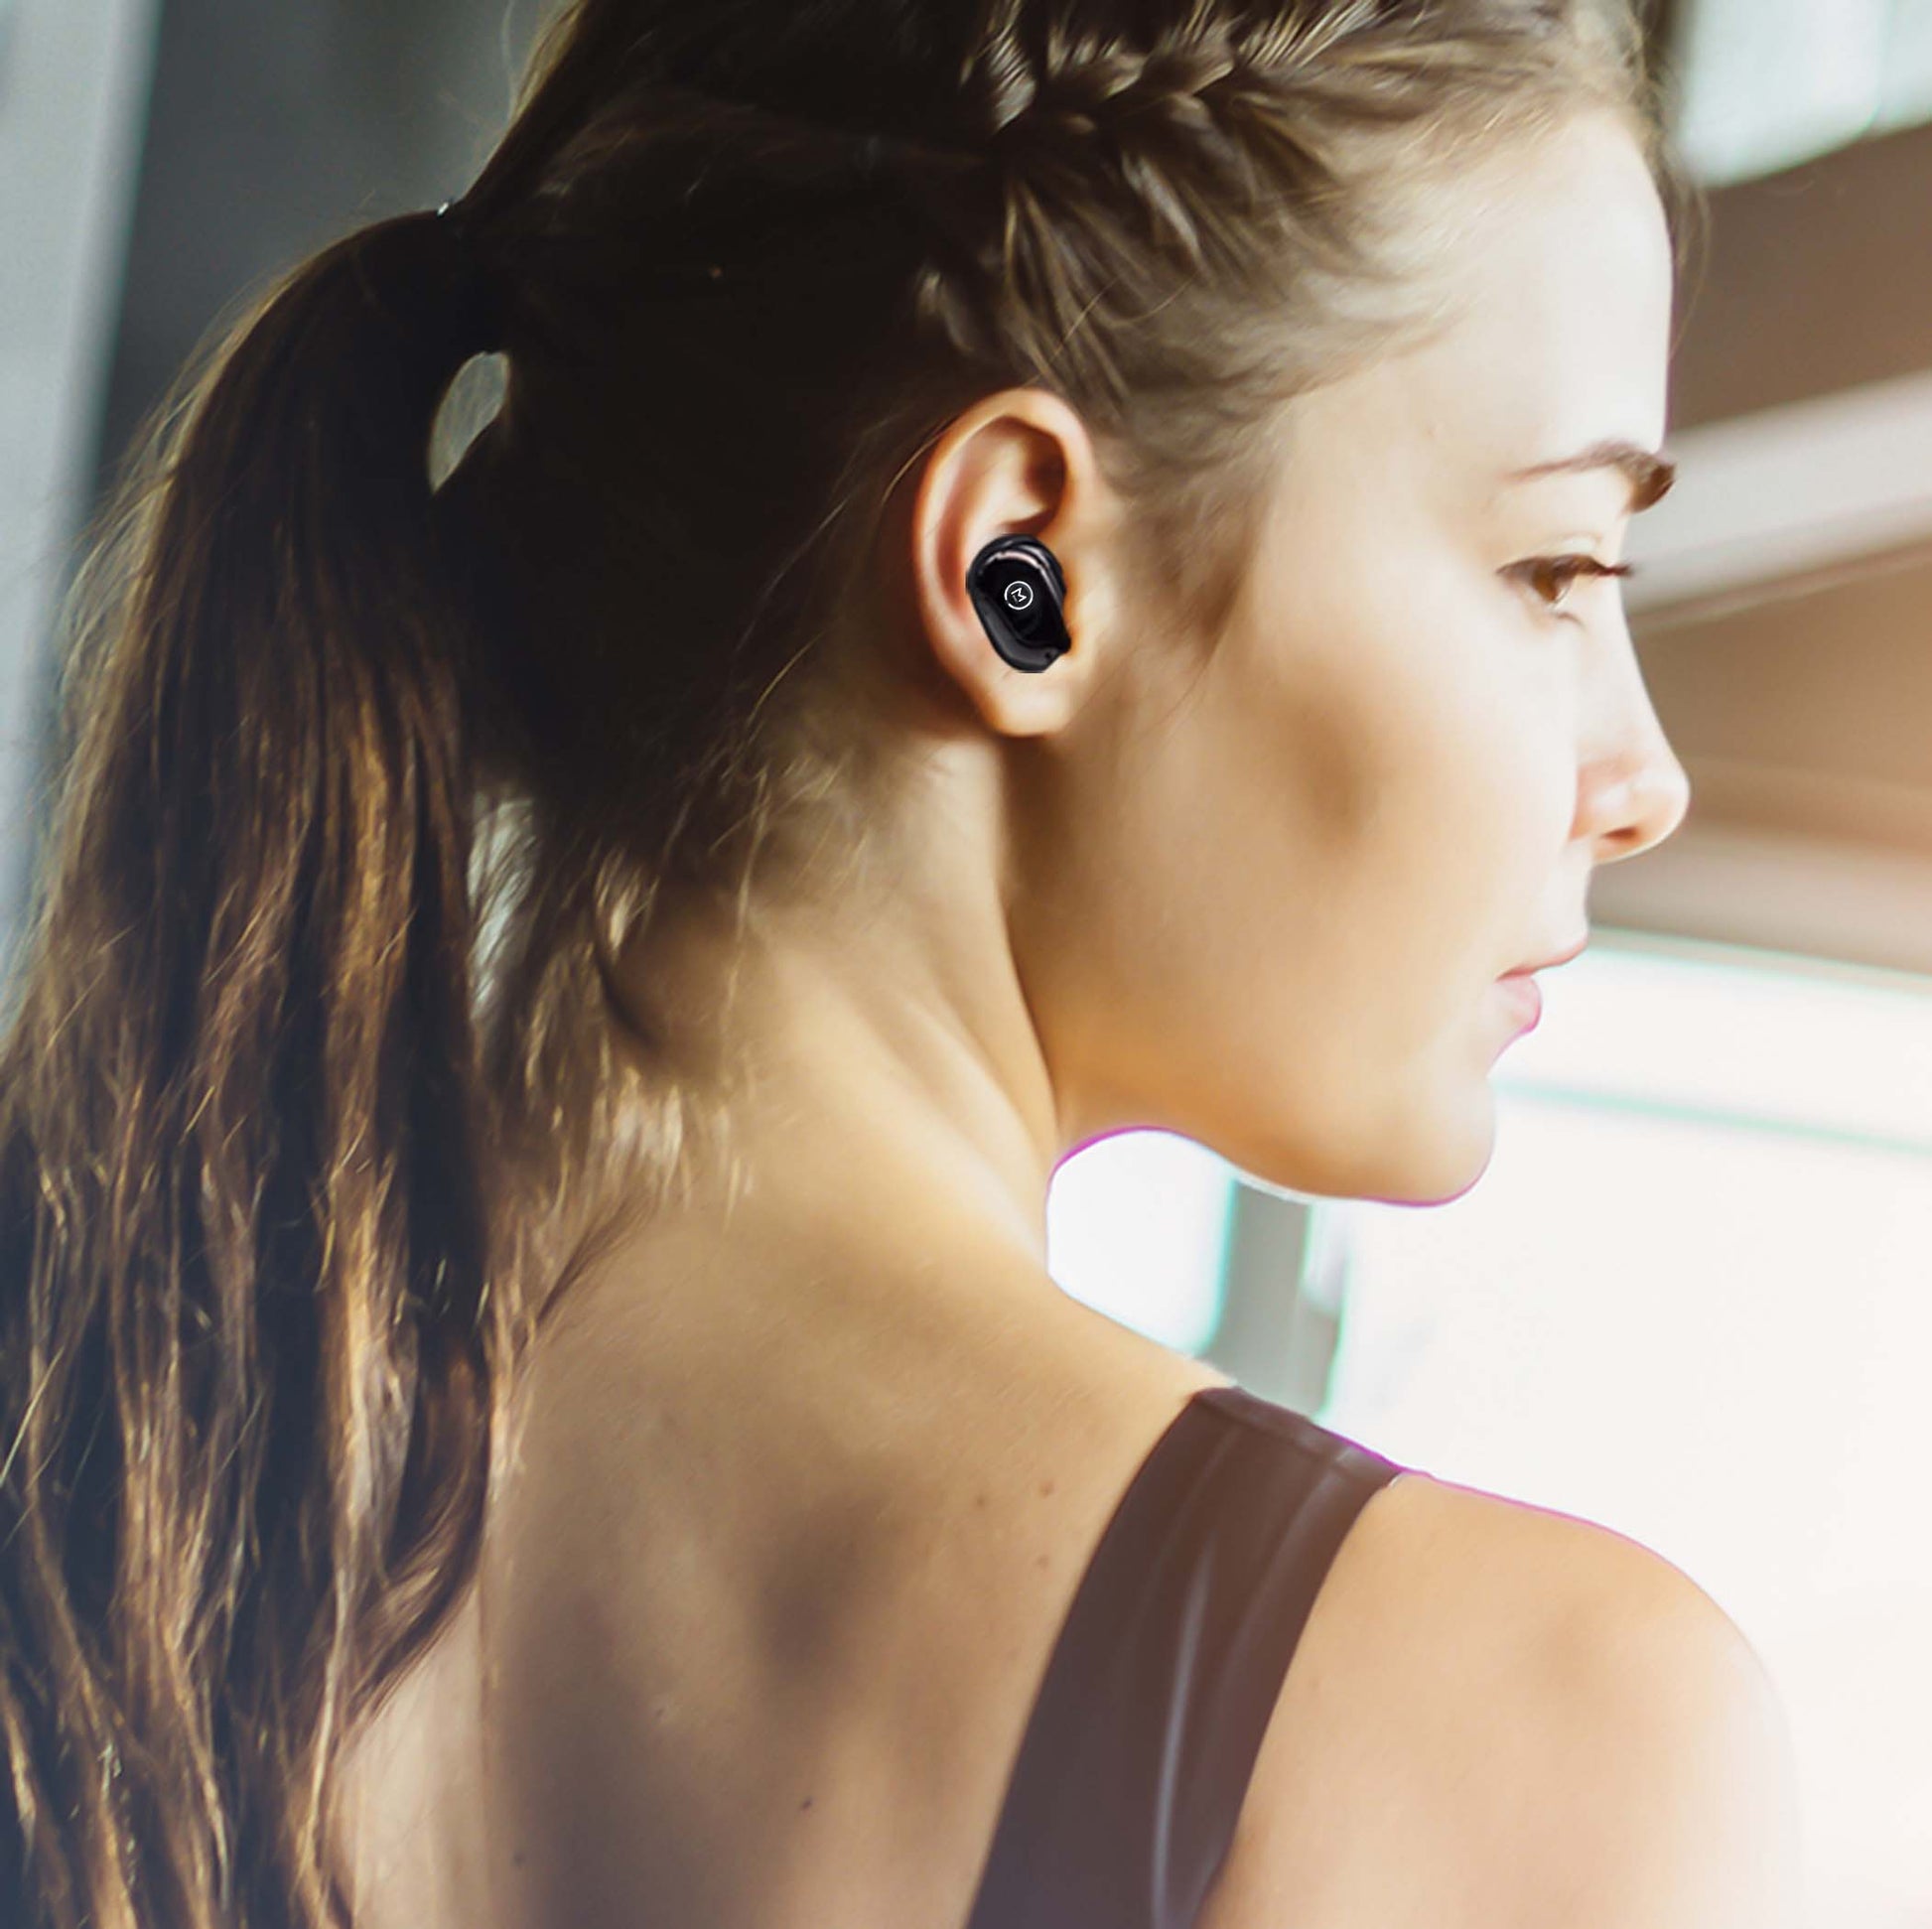 Photo of Morpheus 360 Spire True Wireless Earbuds, a white female wearing the Spire True Wireless Earbuds while working out they are Ultra-Light Weight, Touch Control, Sweatproof. 